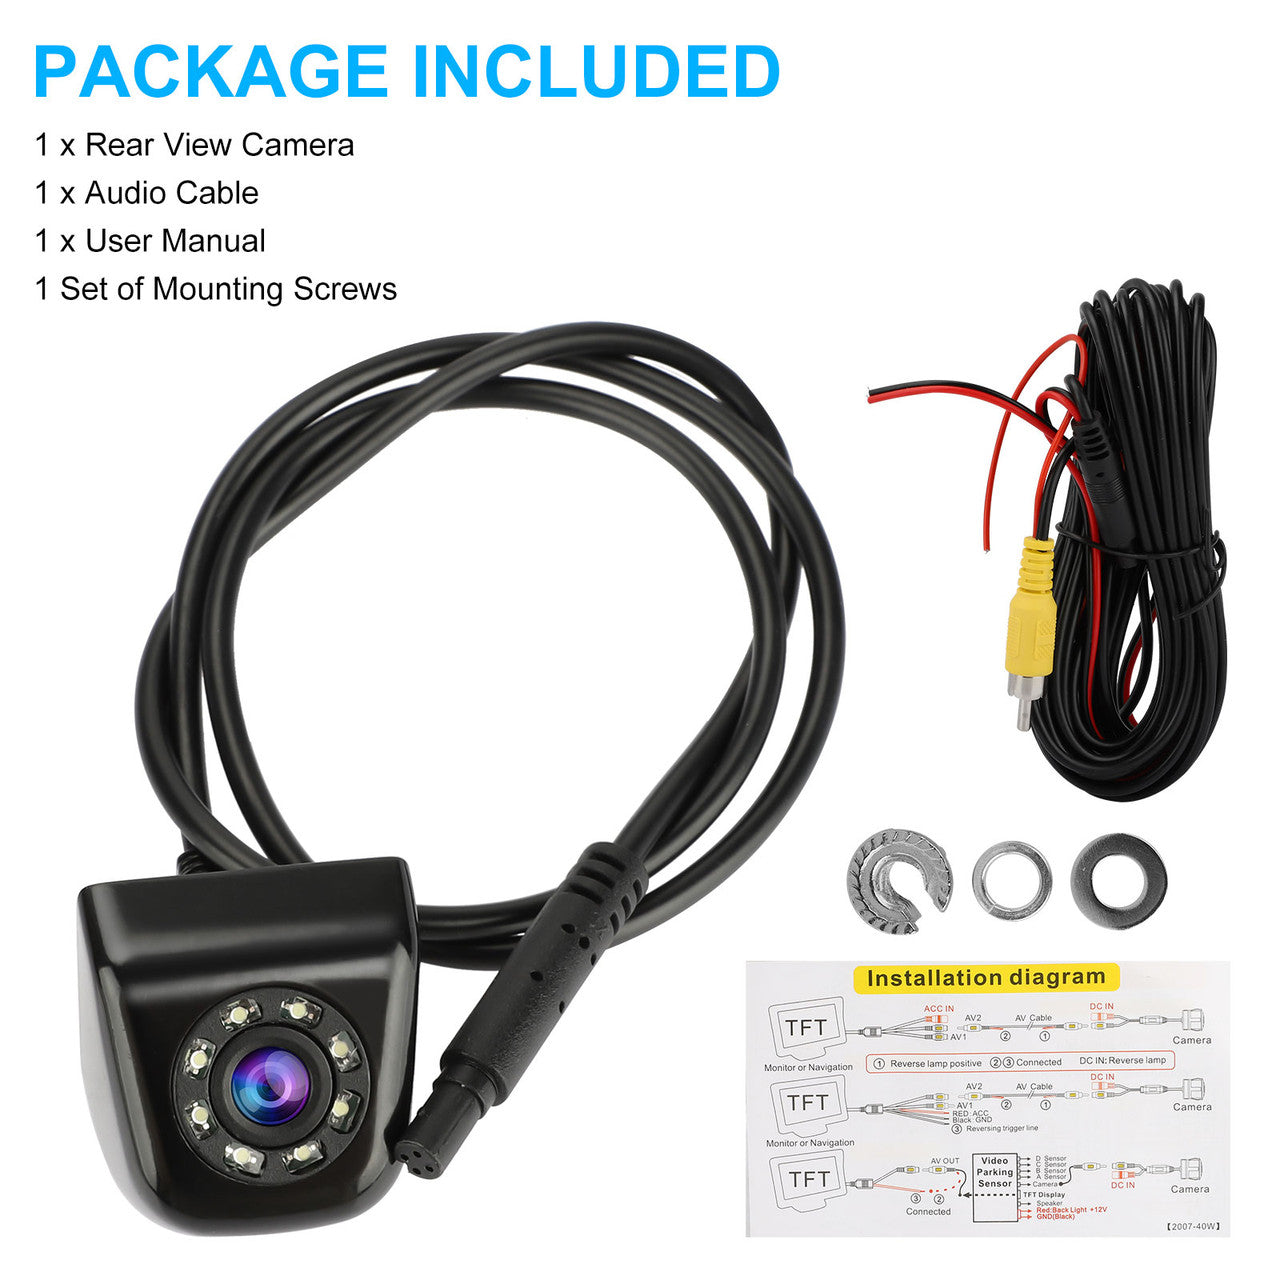 Car Rear View Reverse Camera, 170° Backup View Camera with Guide Line, Waterproof Super Night Vision Rear View Camera with 8 Night Lights, Reverse View Backup Camera for 12V Cars SUV RV Van